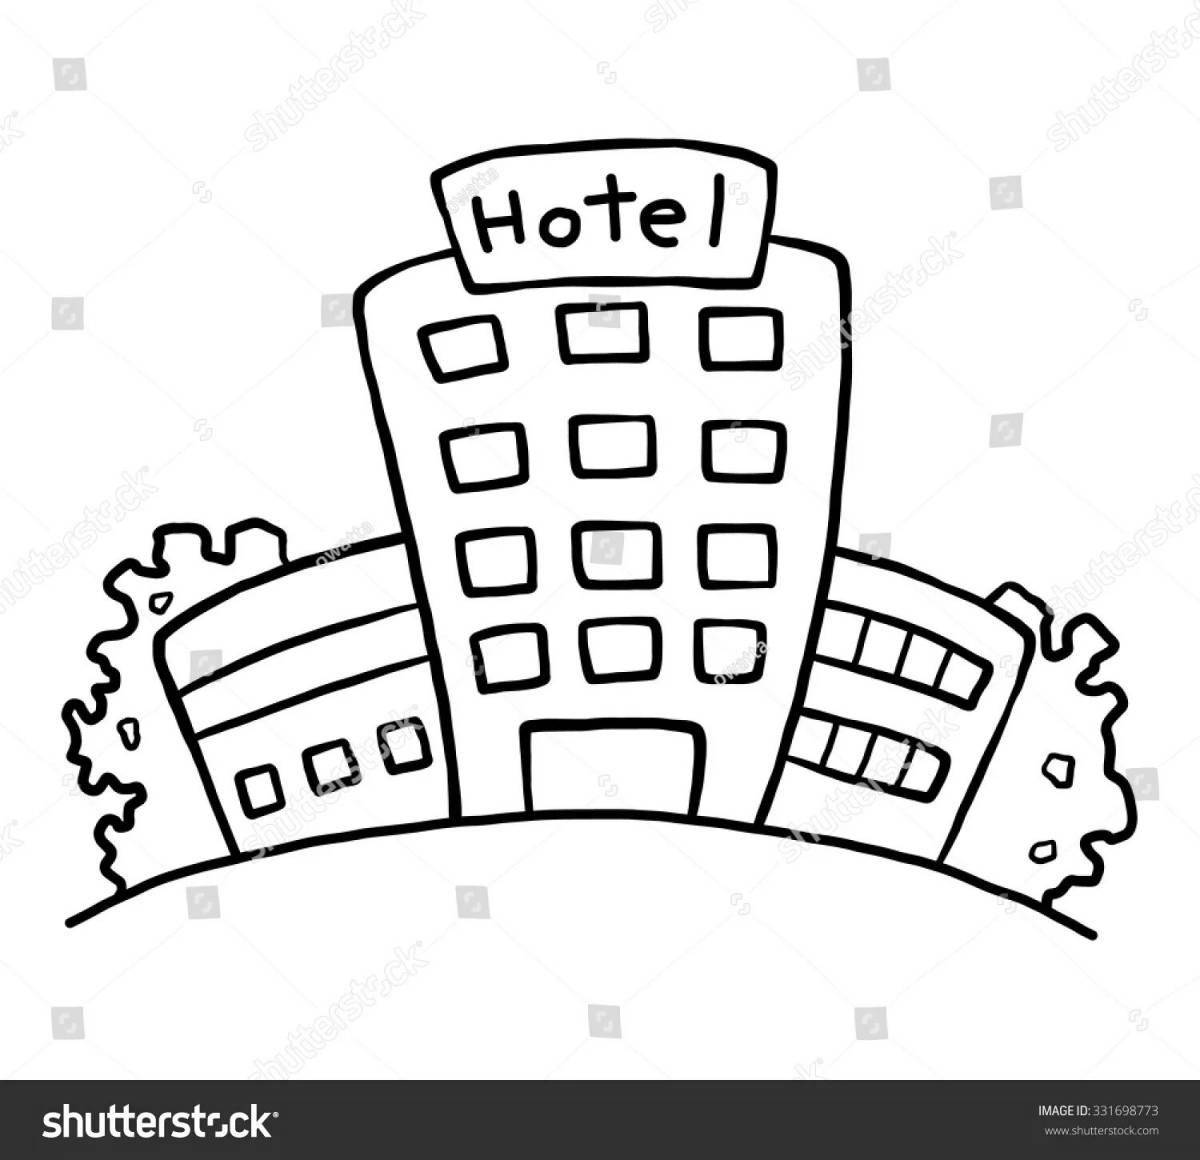 Charming hotel coloring page